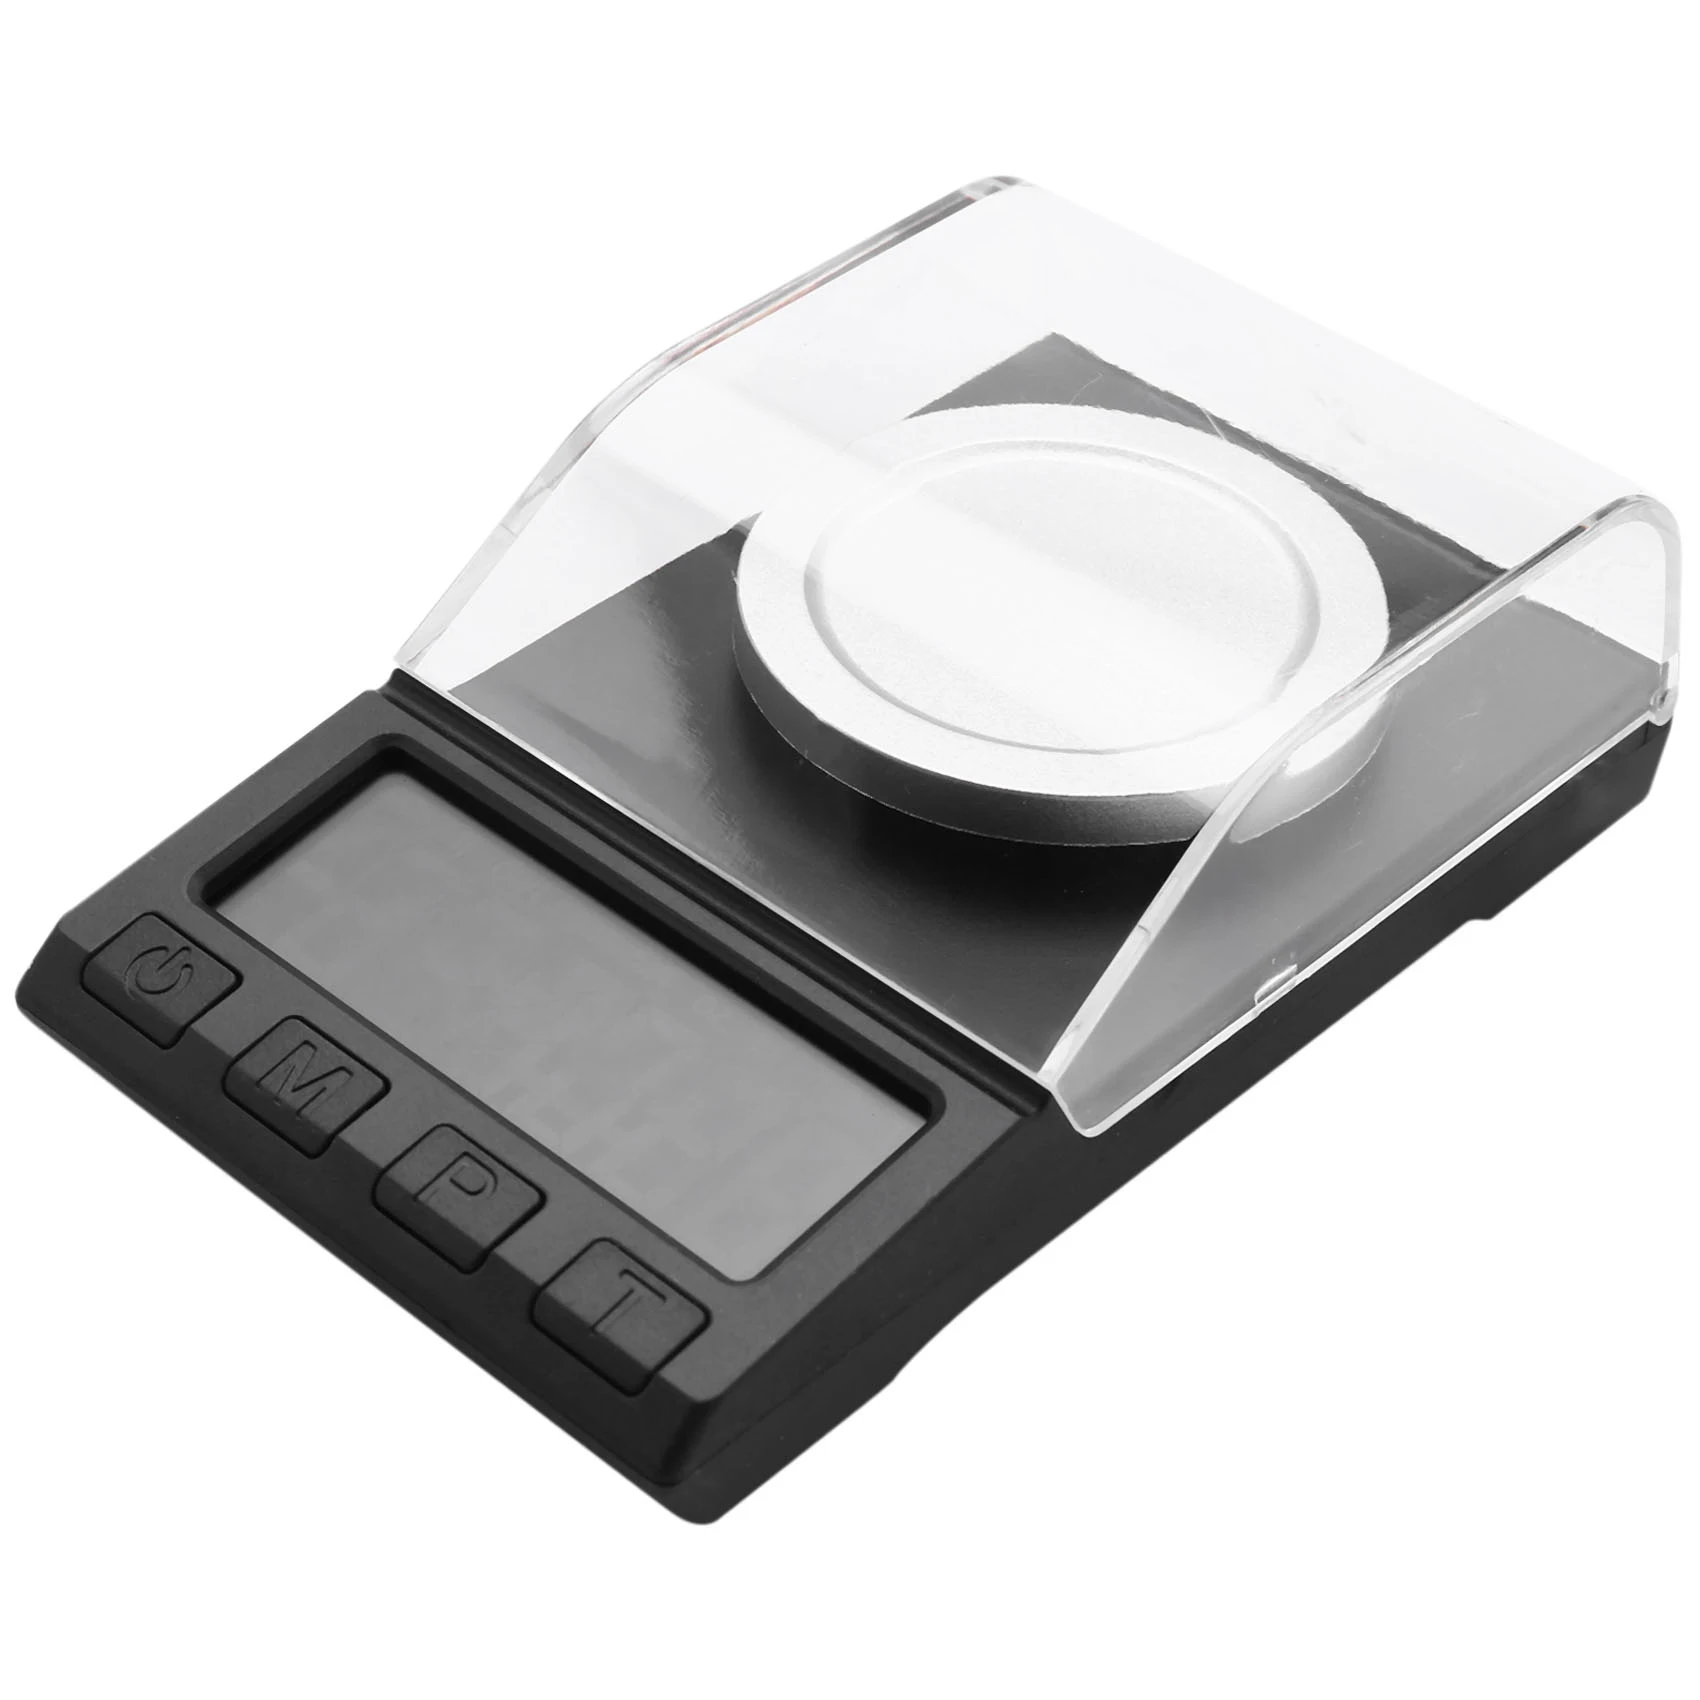 

0.001G Precision Electronic Scales Digital Weighing Gem Jewelry Diamond Scale Portable Lab Weight Milligram Scale 100G 0.001G